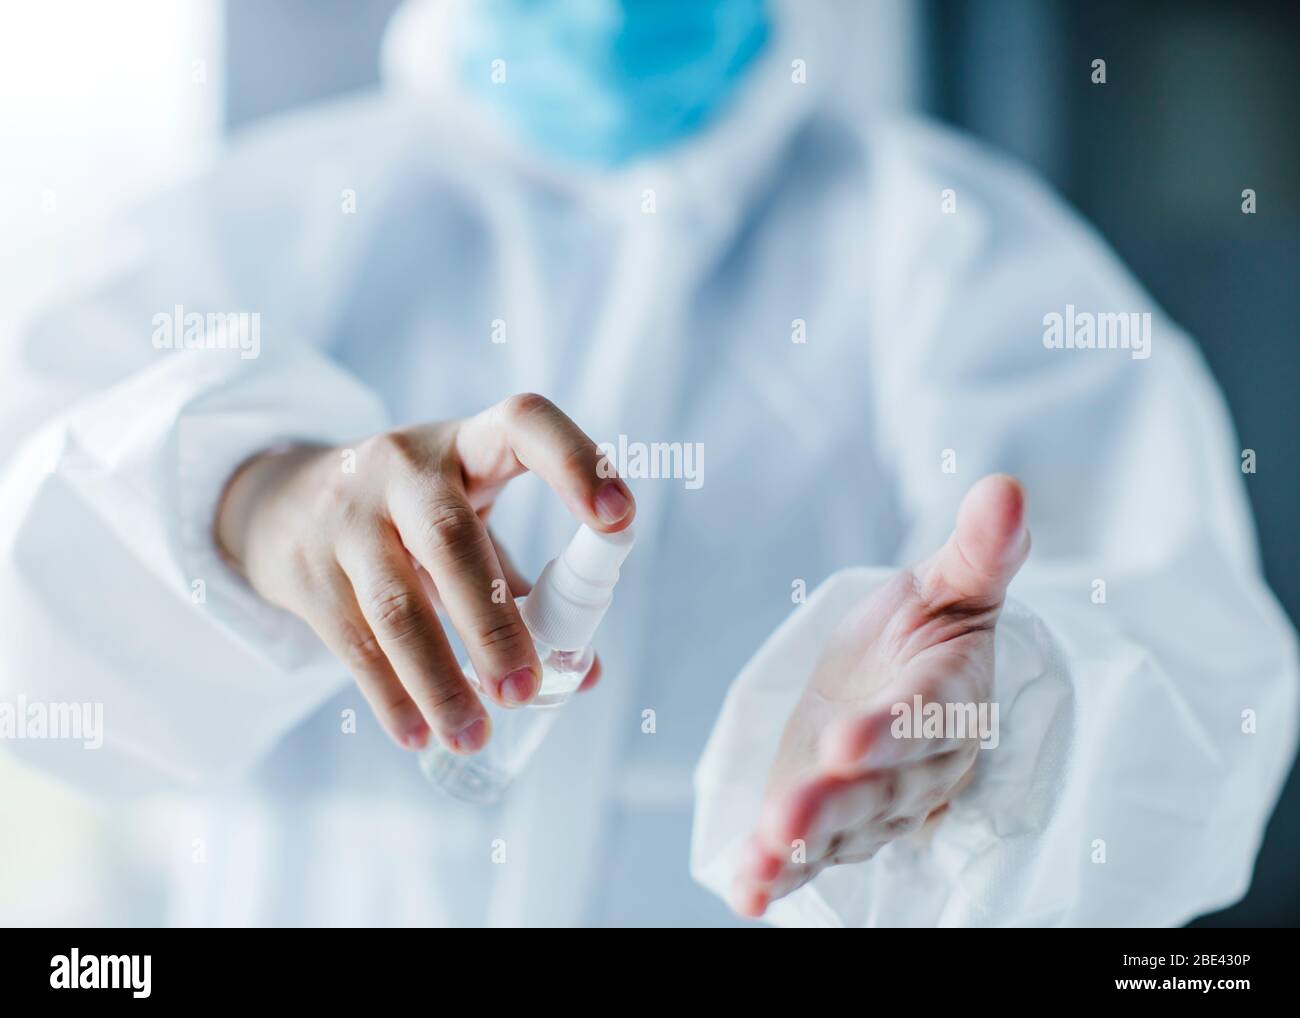 doctor Hand  using  sanitizer prevent virus and plague infection, prevent covid-19 virus Stock Photo